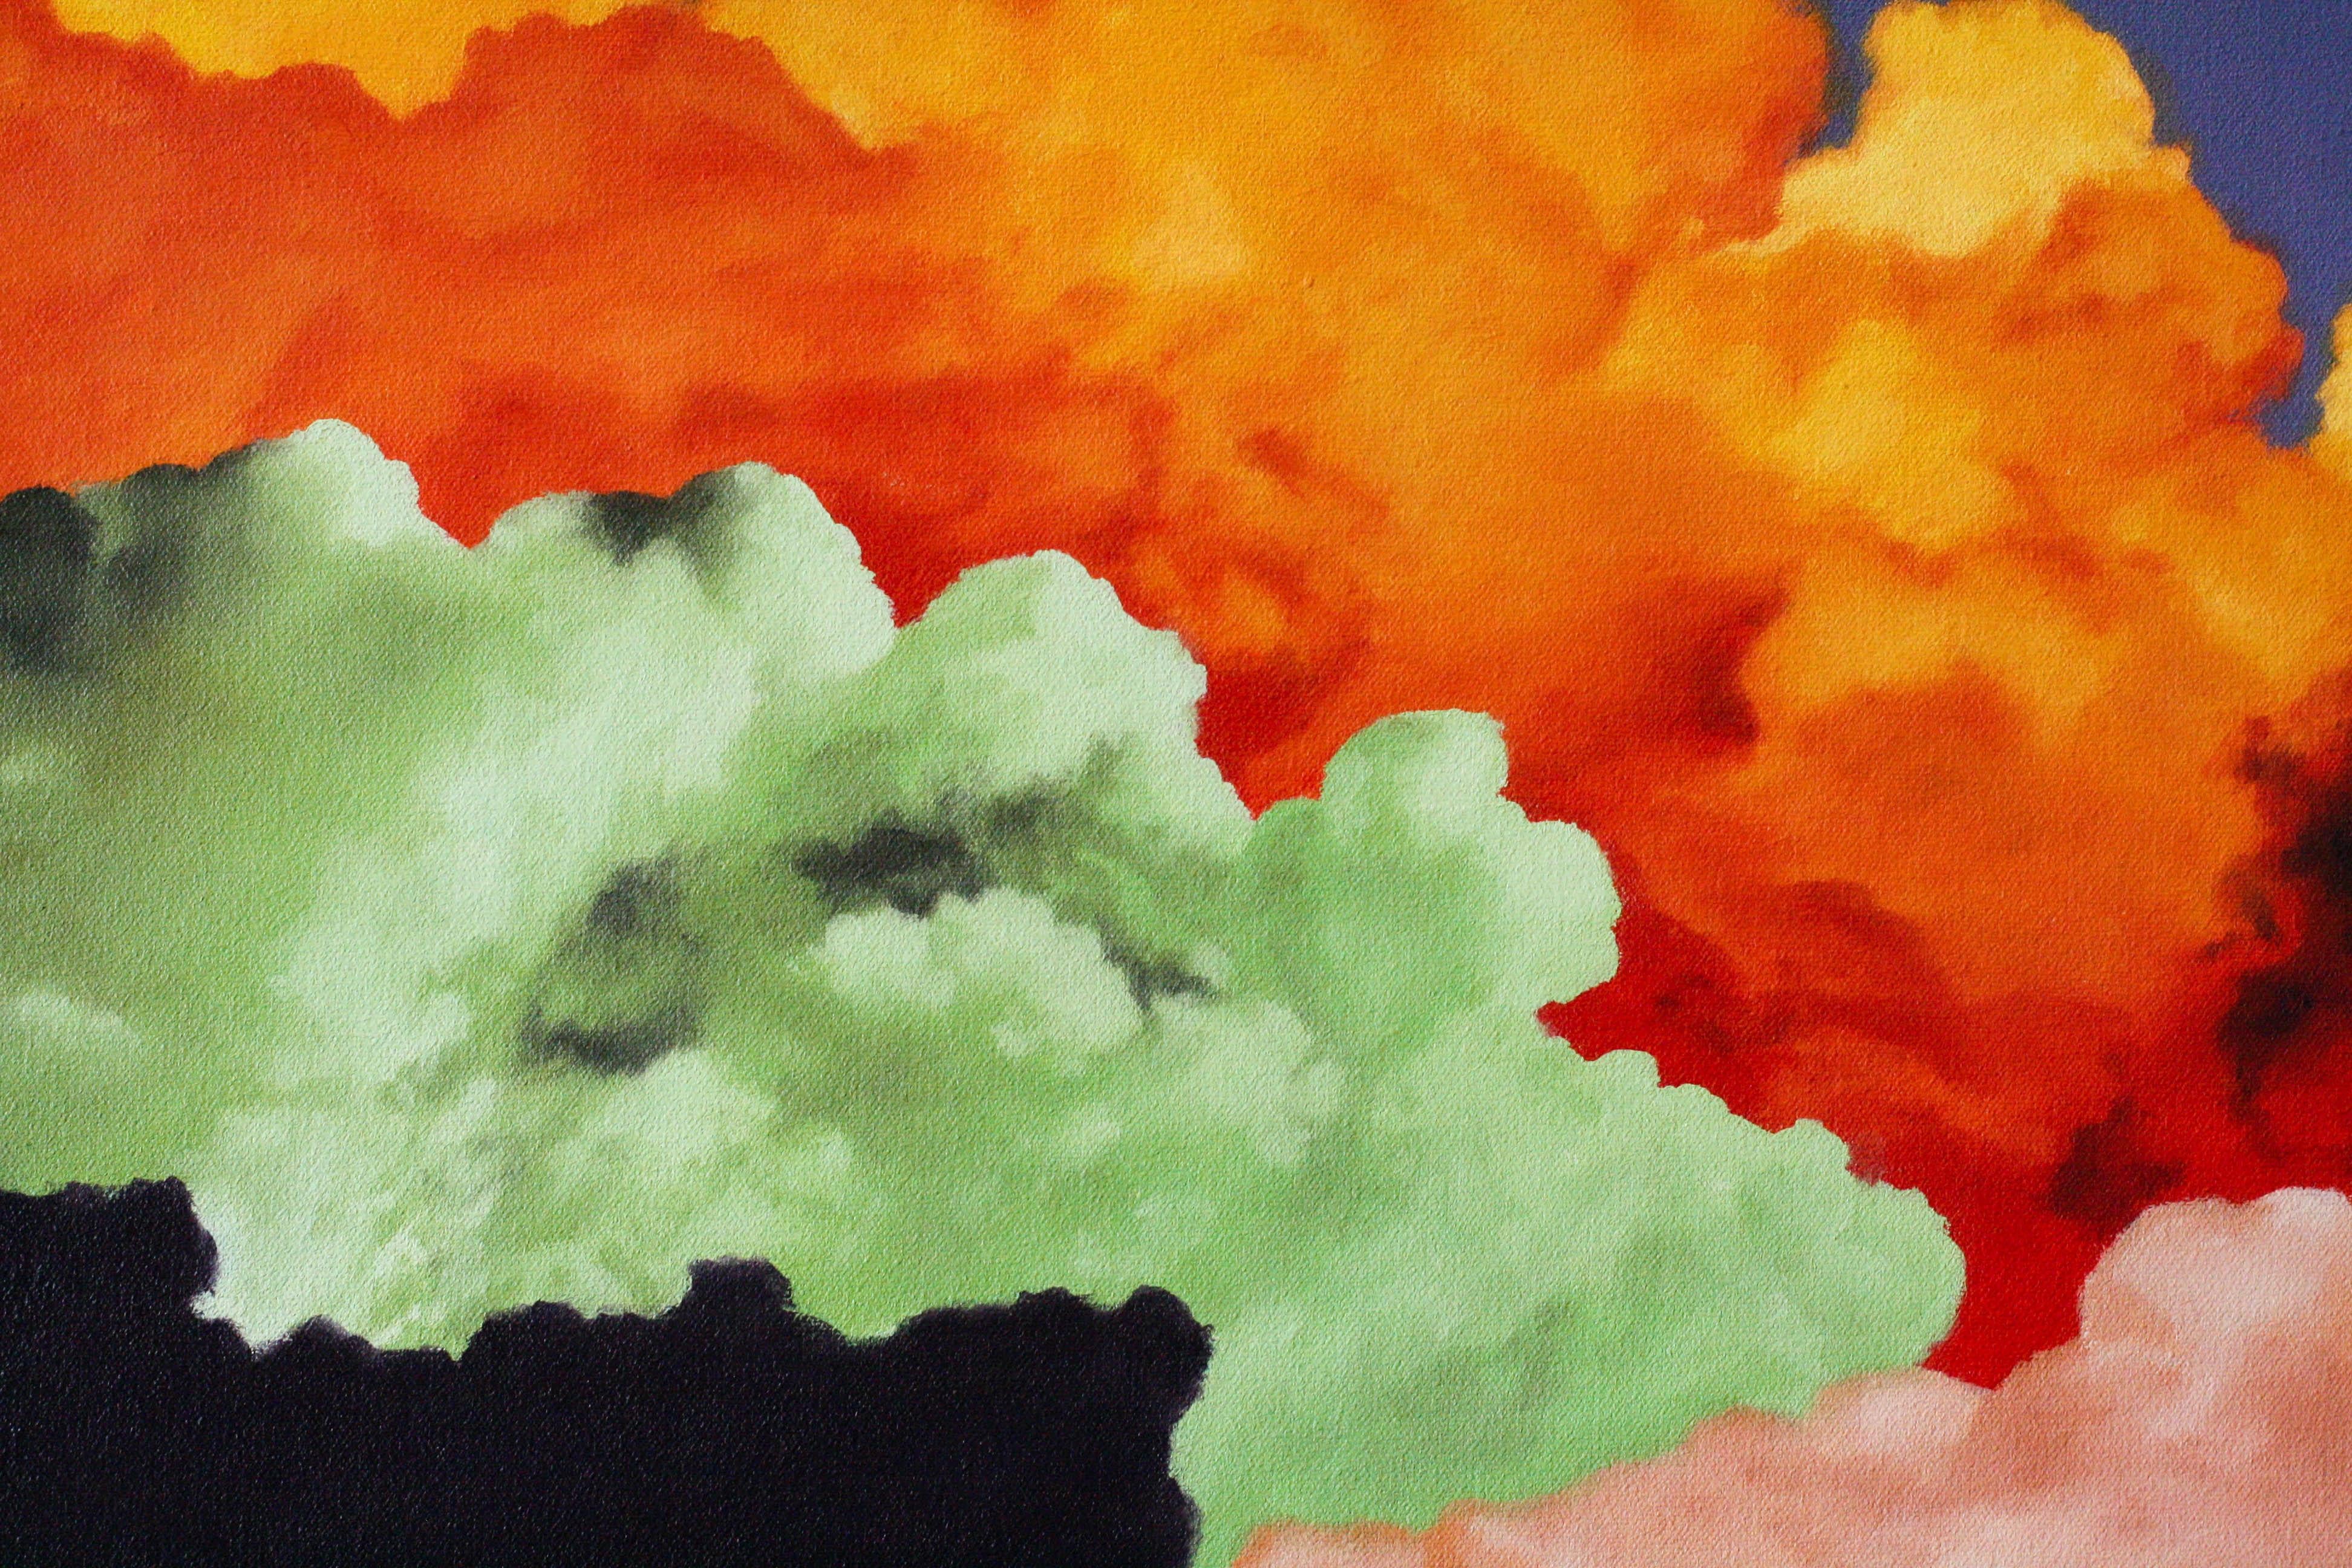 This skyscape oil painting on canvas is a stunning depiction of brightly colored clouds. The artist employs bright hues of orange, green, blue, pink, white, and black. 

Julian Rogers (b. 1981) is a Nashville native who lived in New York for five